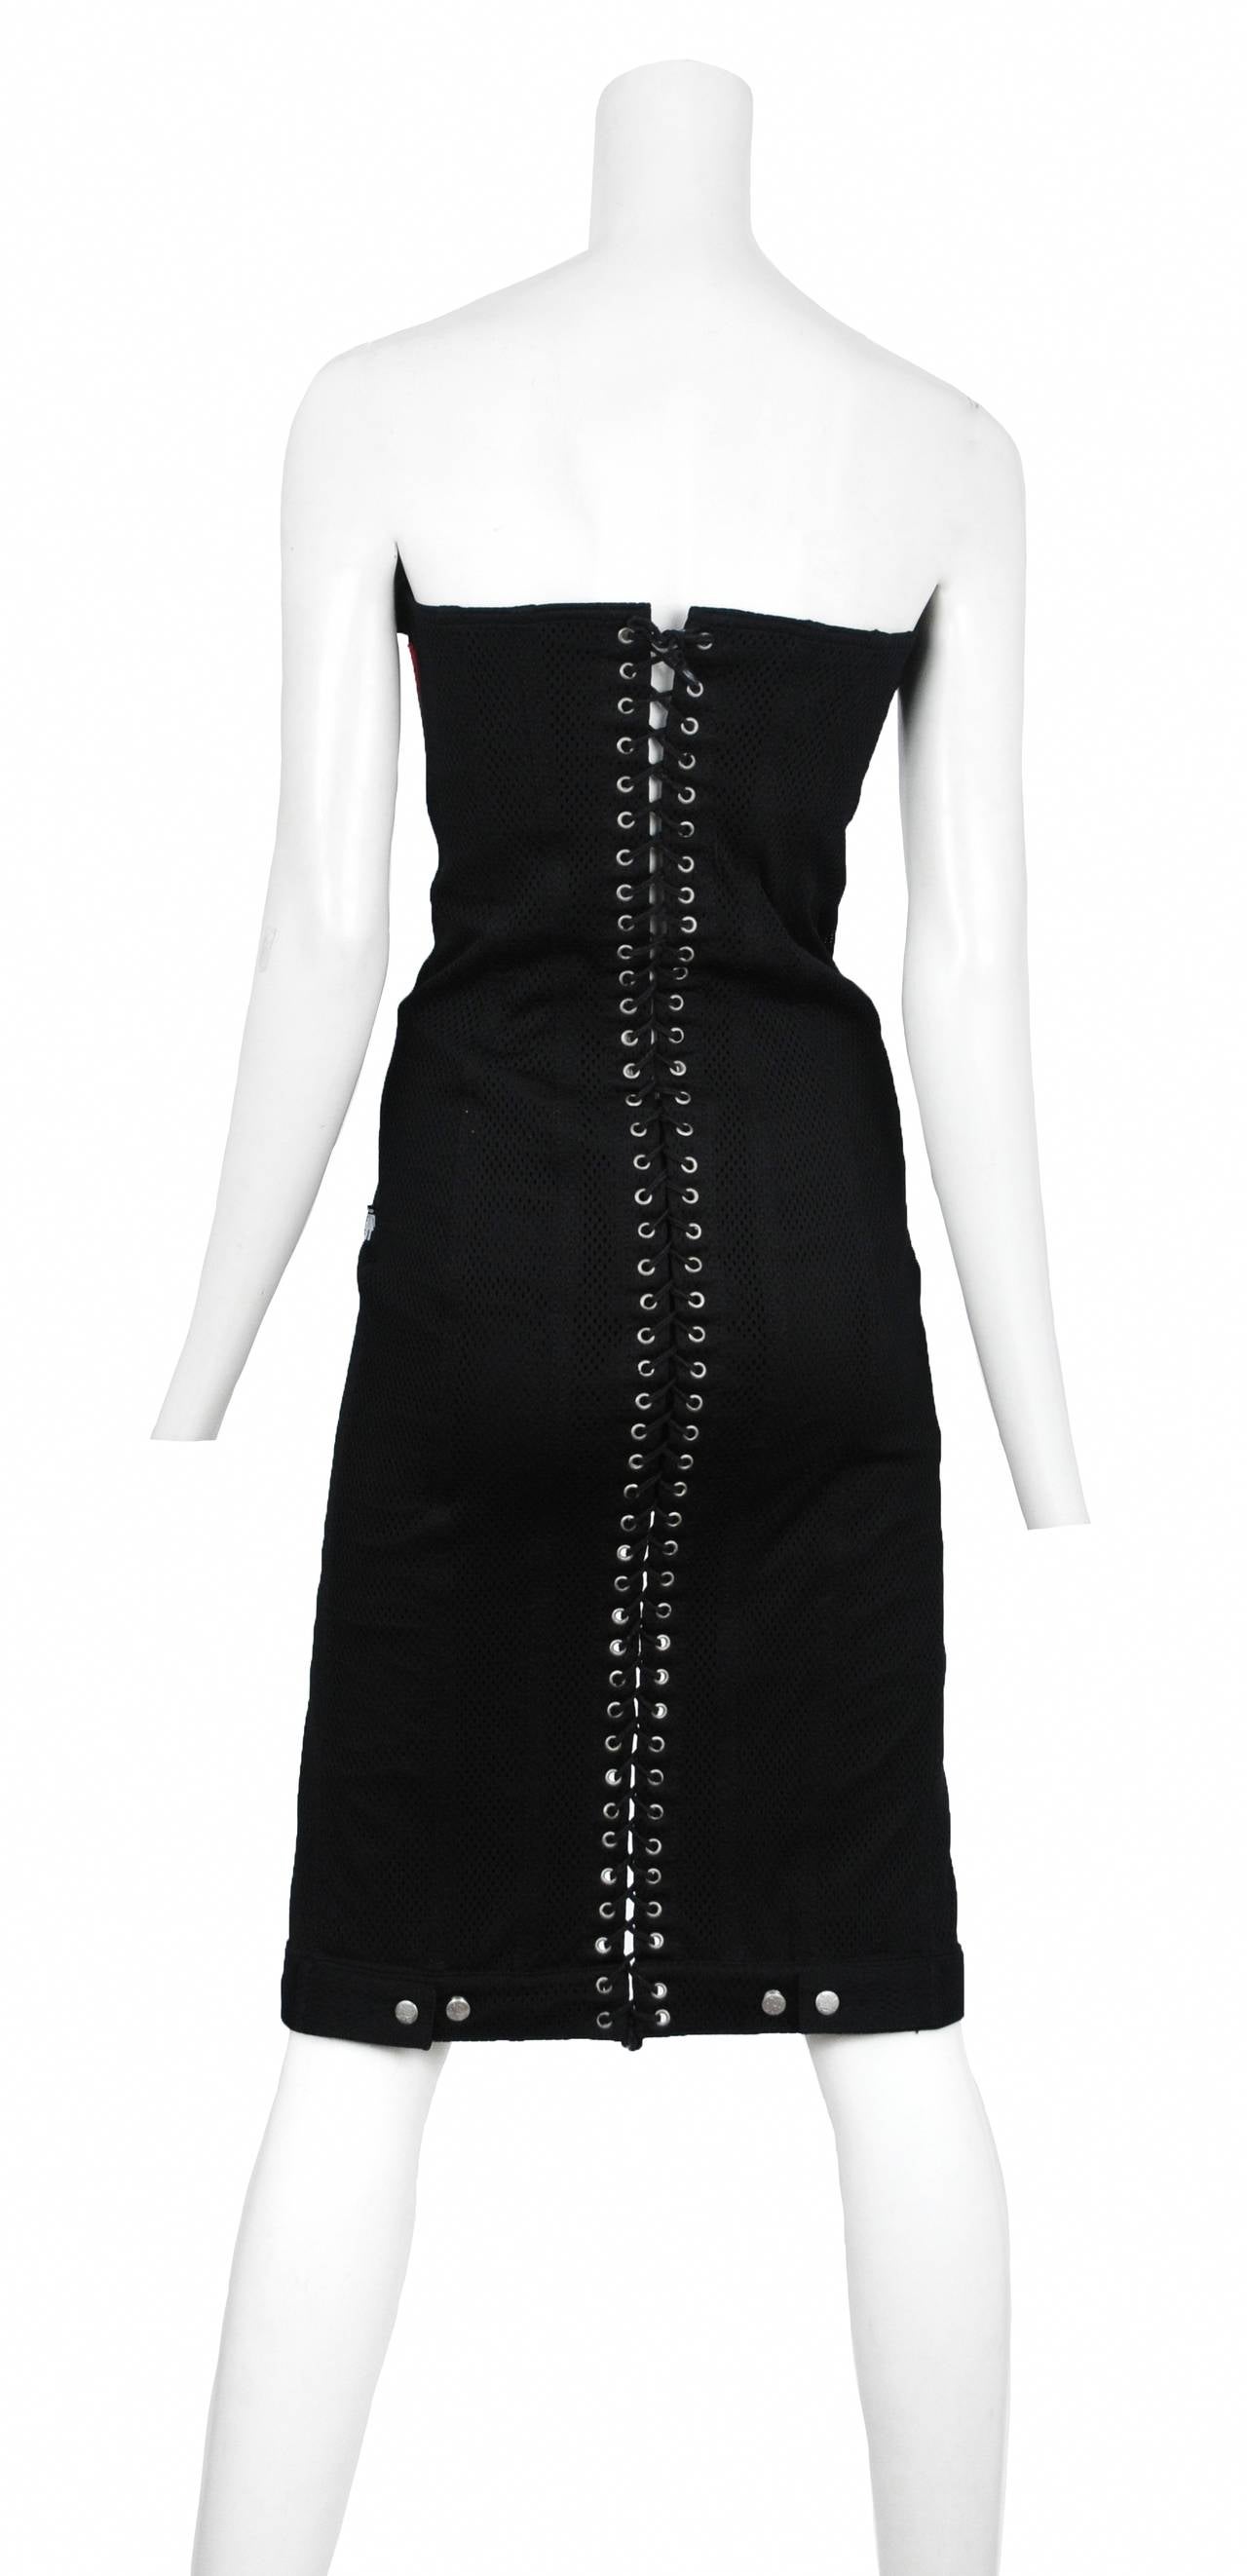 Vintage Jean Paul Gaultier black denim strapless button down dress with perforated jersey overlay printed 